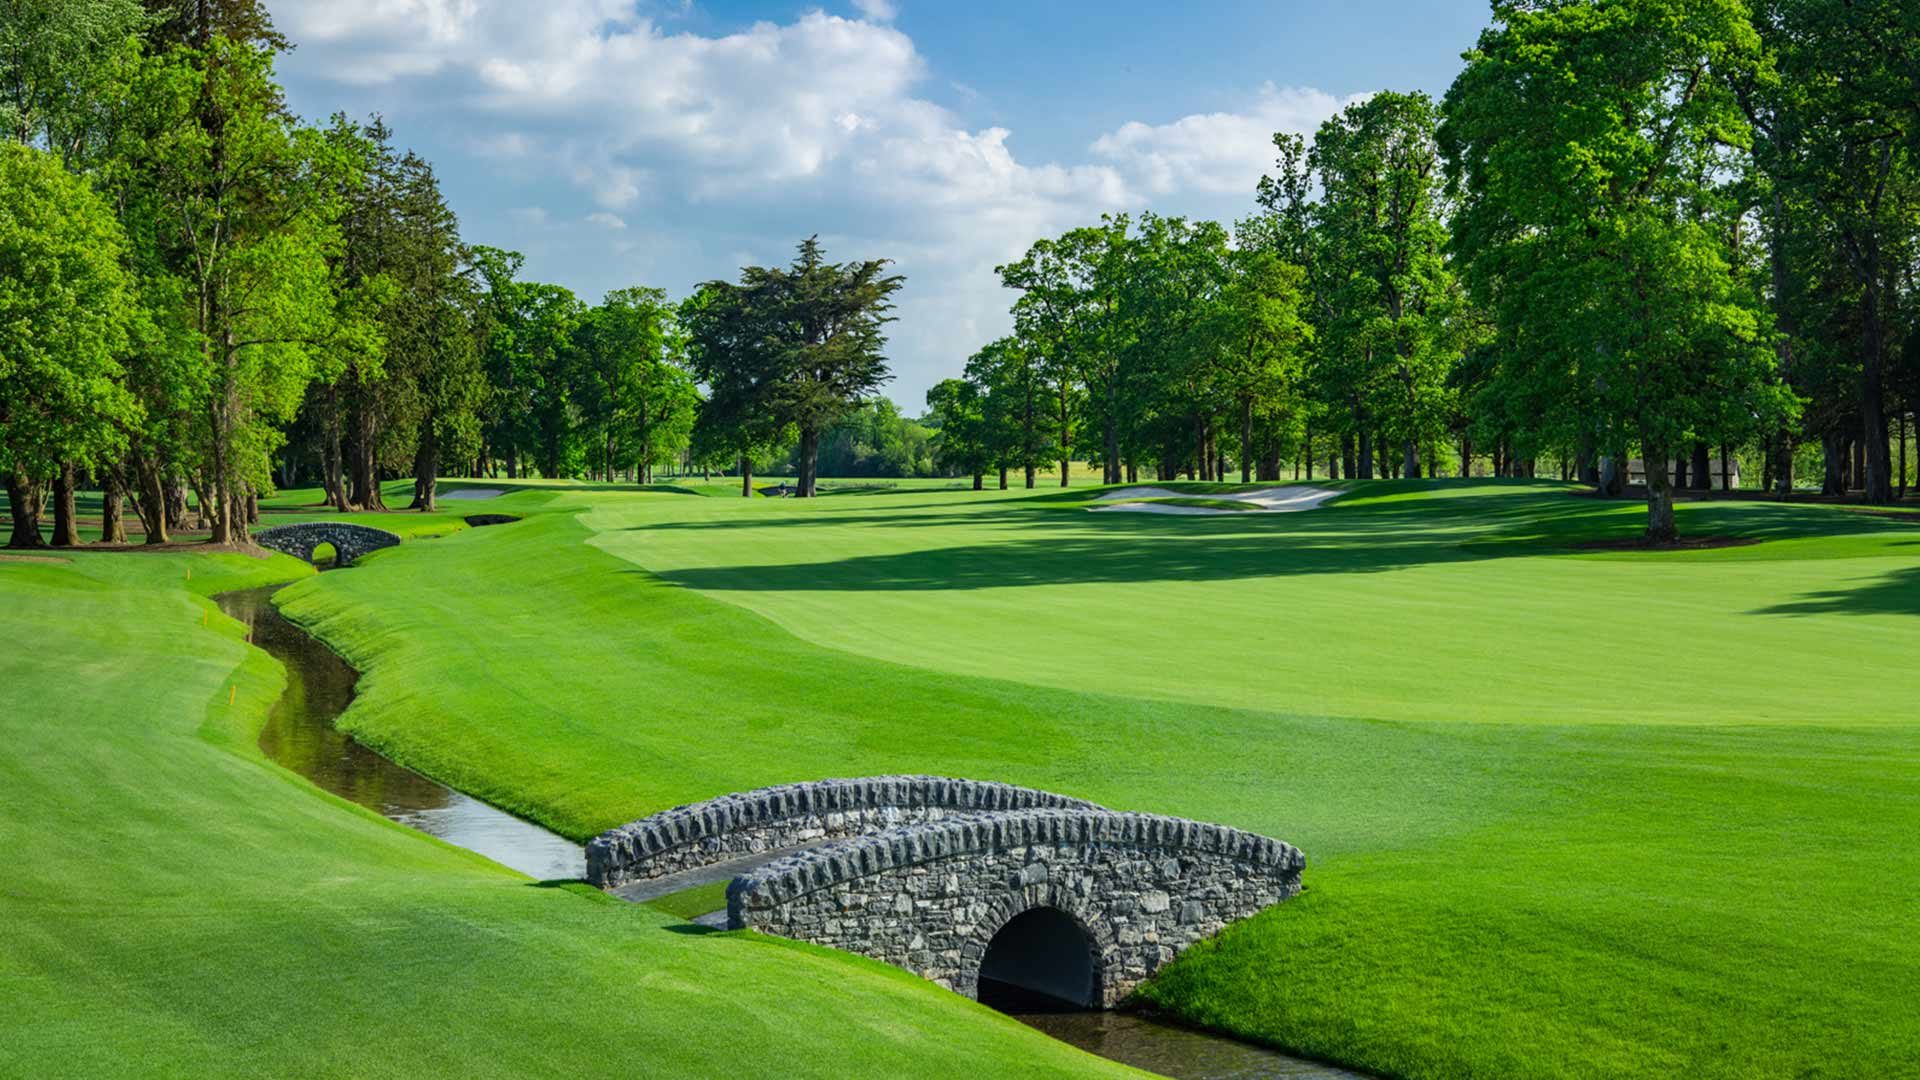 Ireland to host the 2026 Ryder Cup at Adare Manor